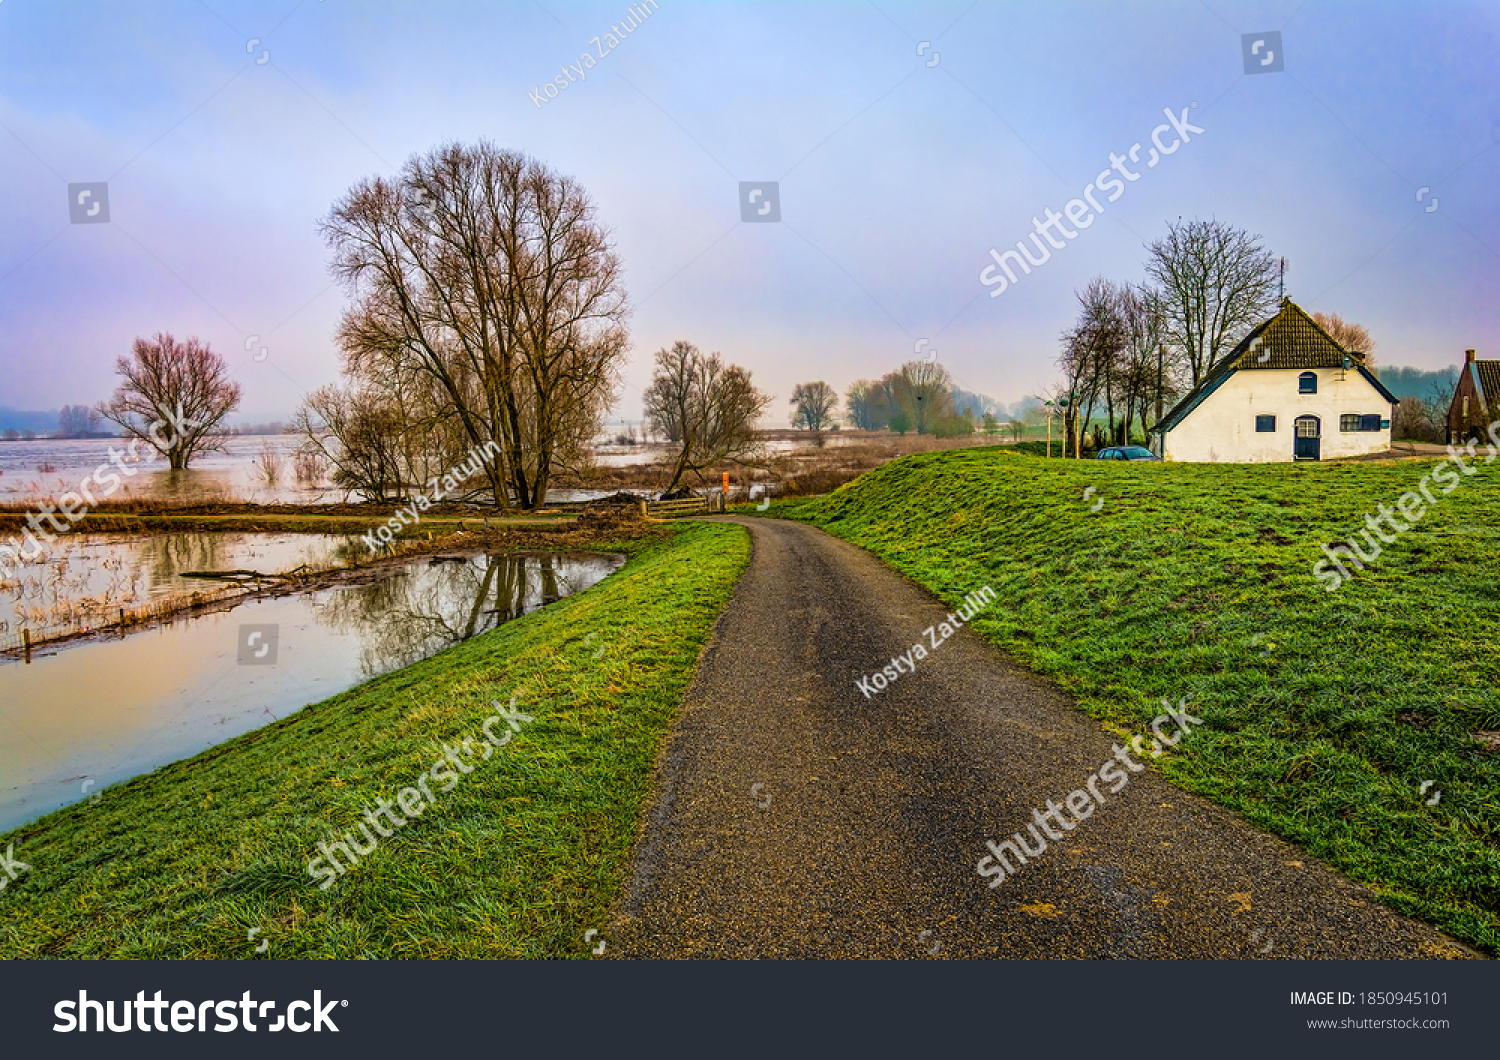 Rural country village road view. Country road in rural village #1850945101